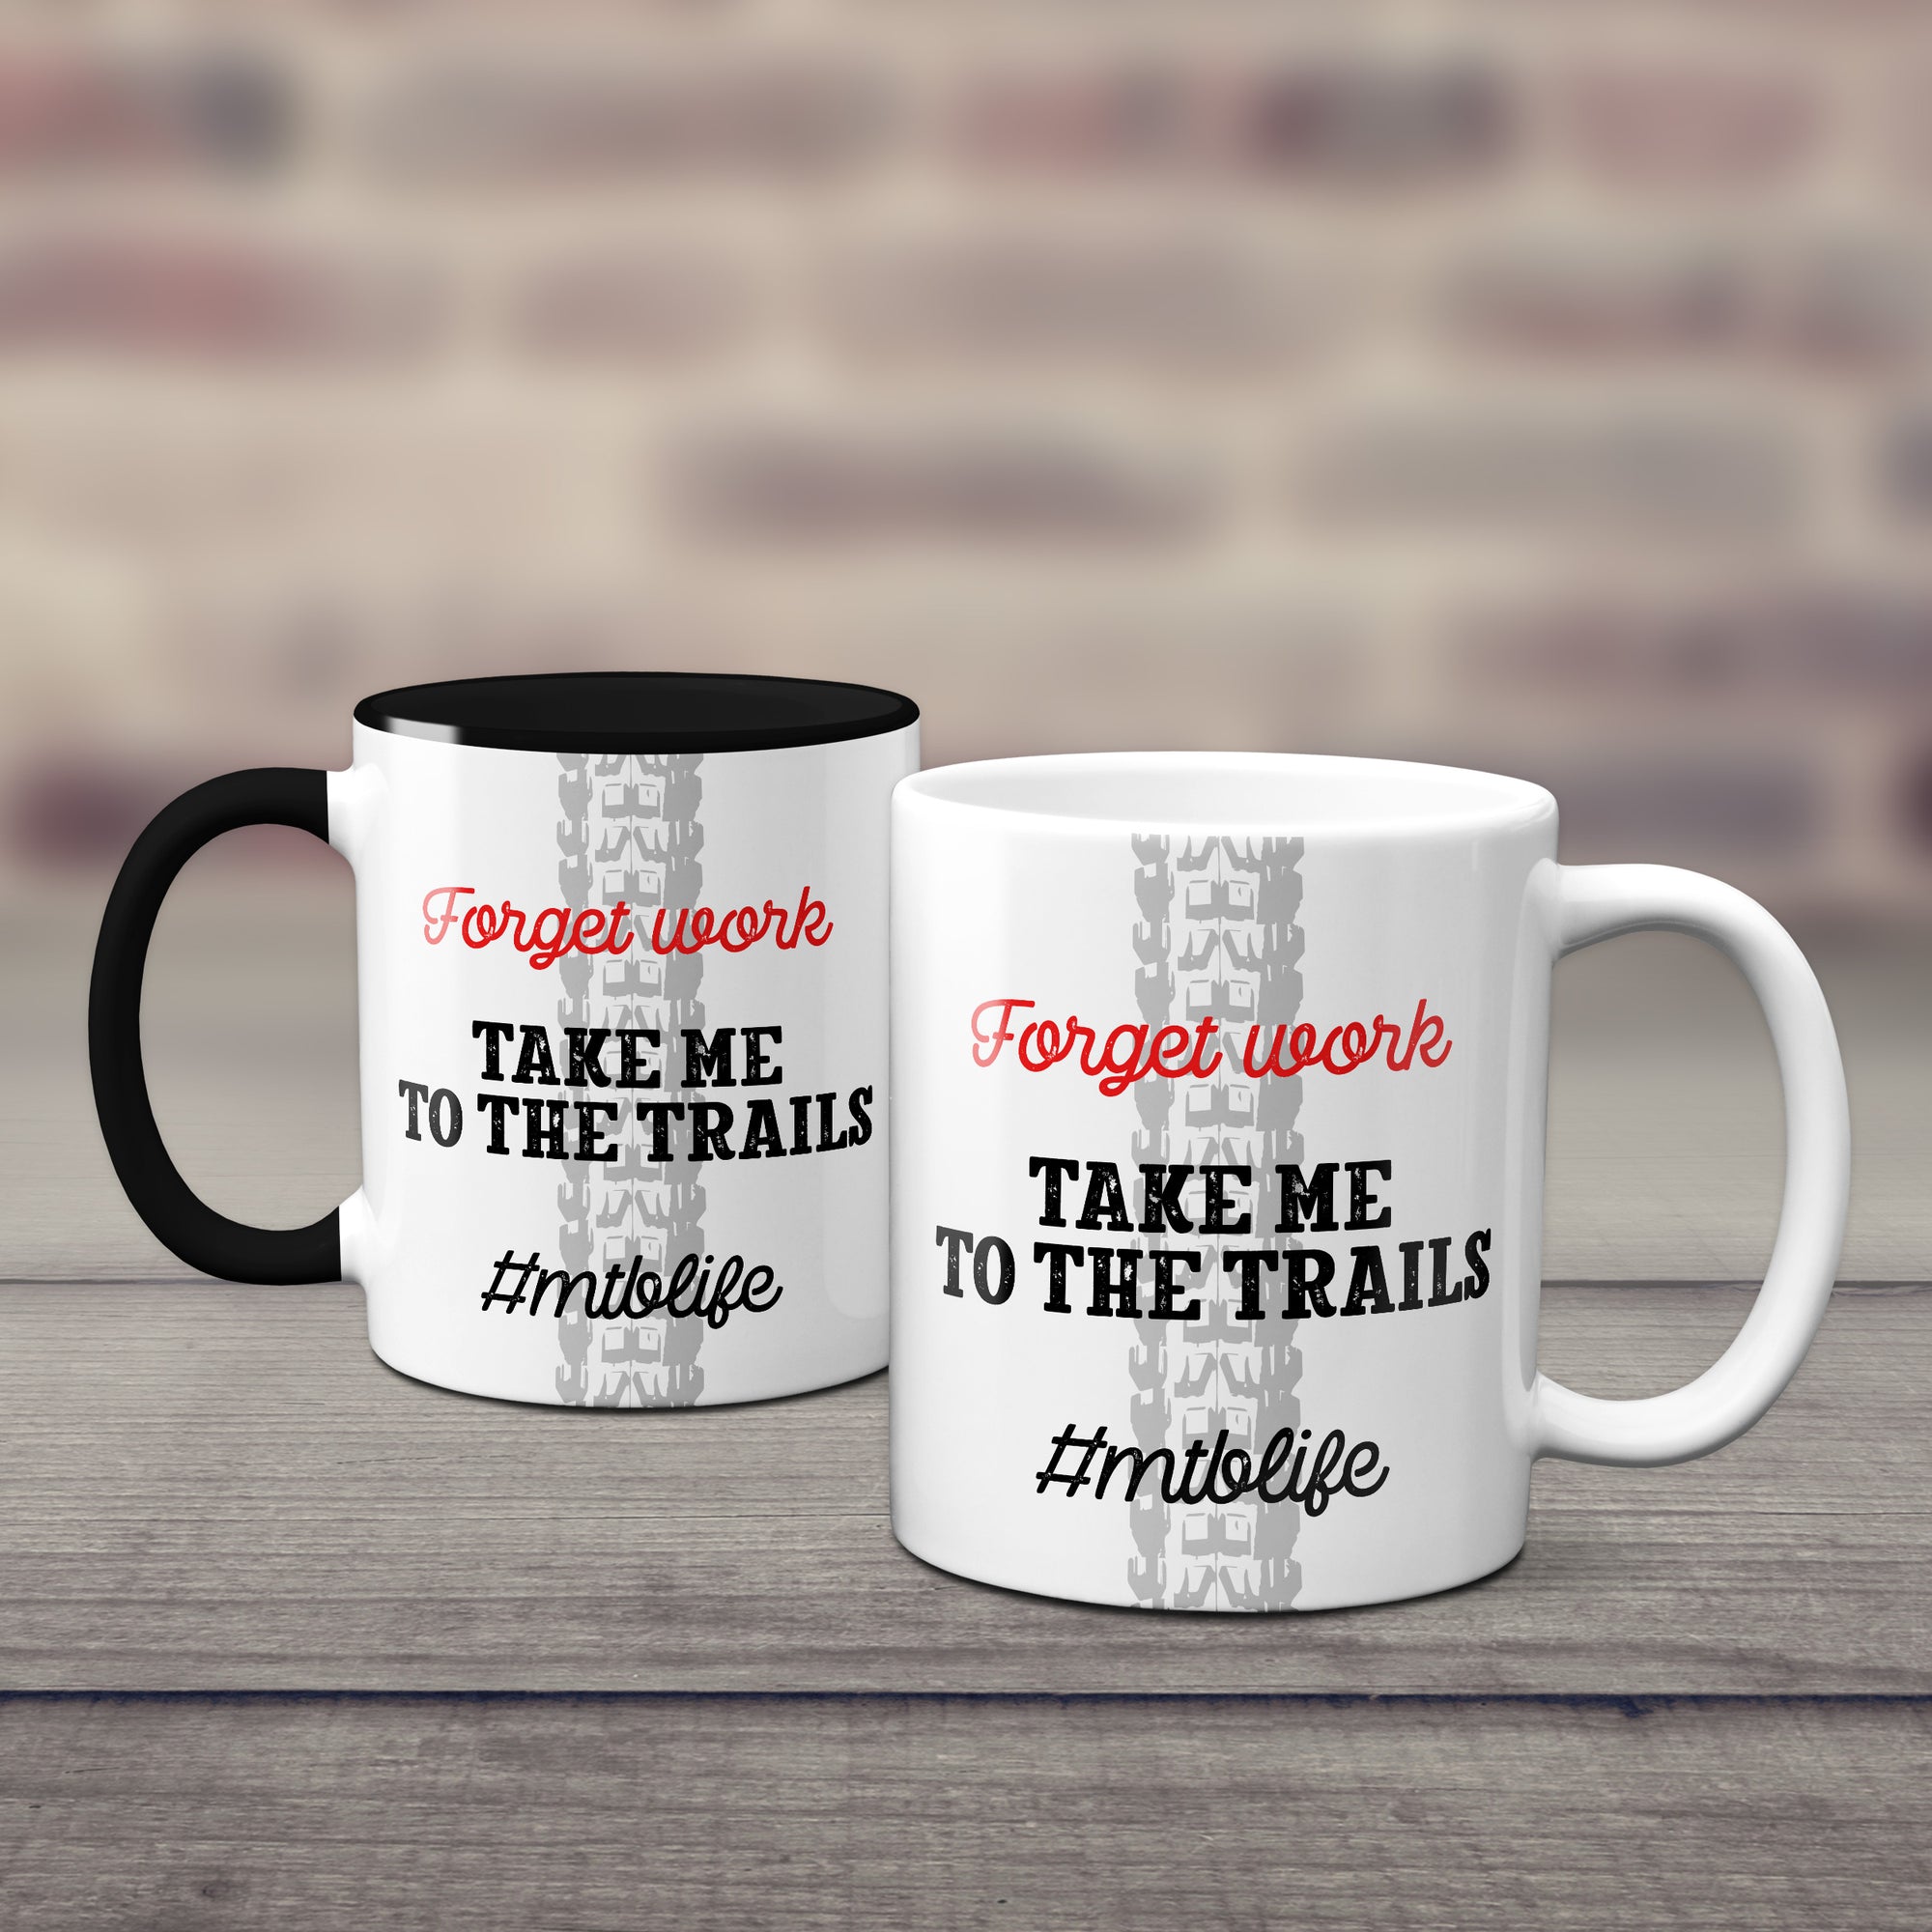 https://cdn.shopify.com/s/files/1/0212/8650/products/EllieBeanPrints-Forget-Work-Take-Me-To-The-Trails-MTB-Mugs_2000x.jpg?v=1620867286